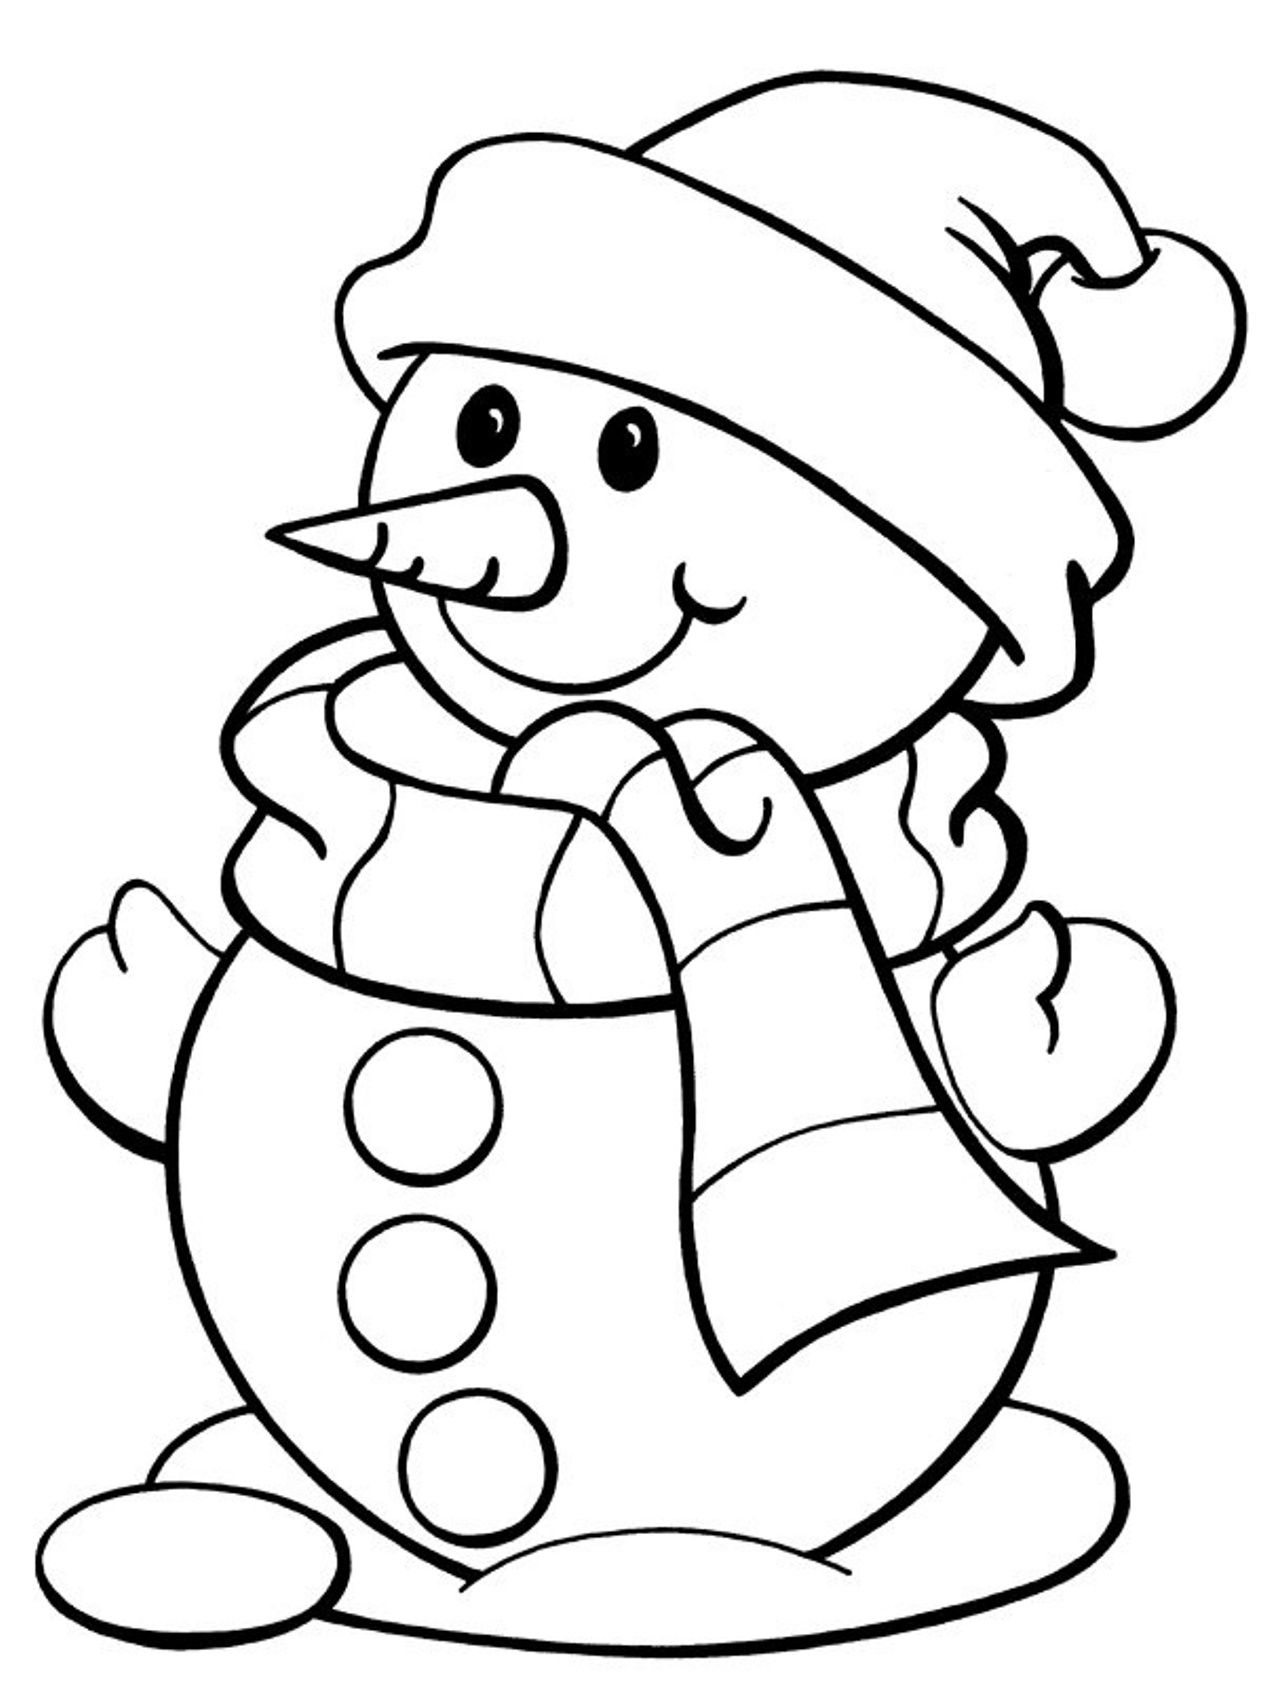 preschool-coloring-pages-for-winter